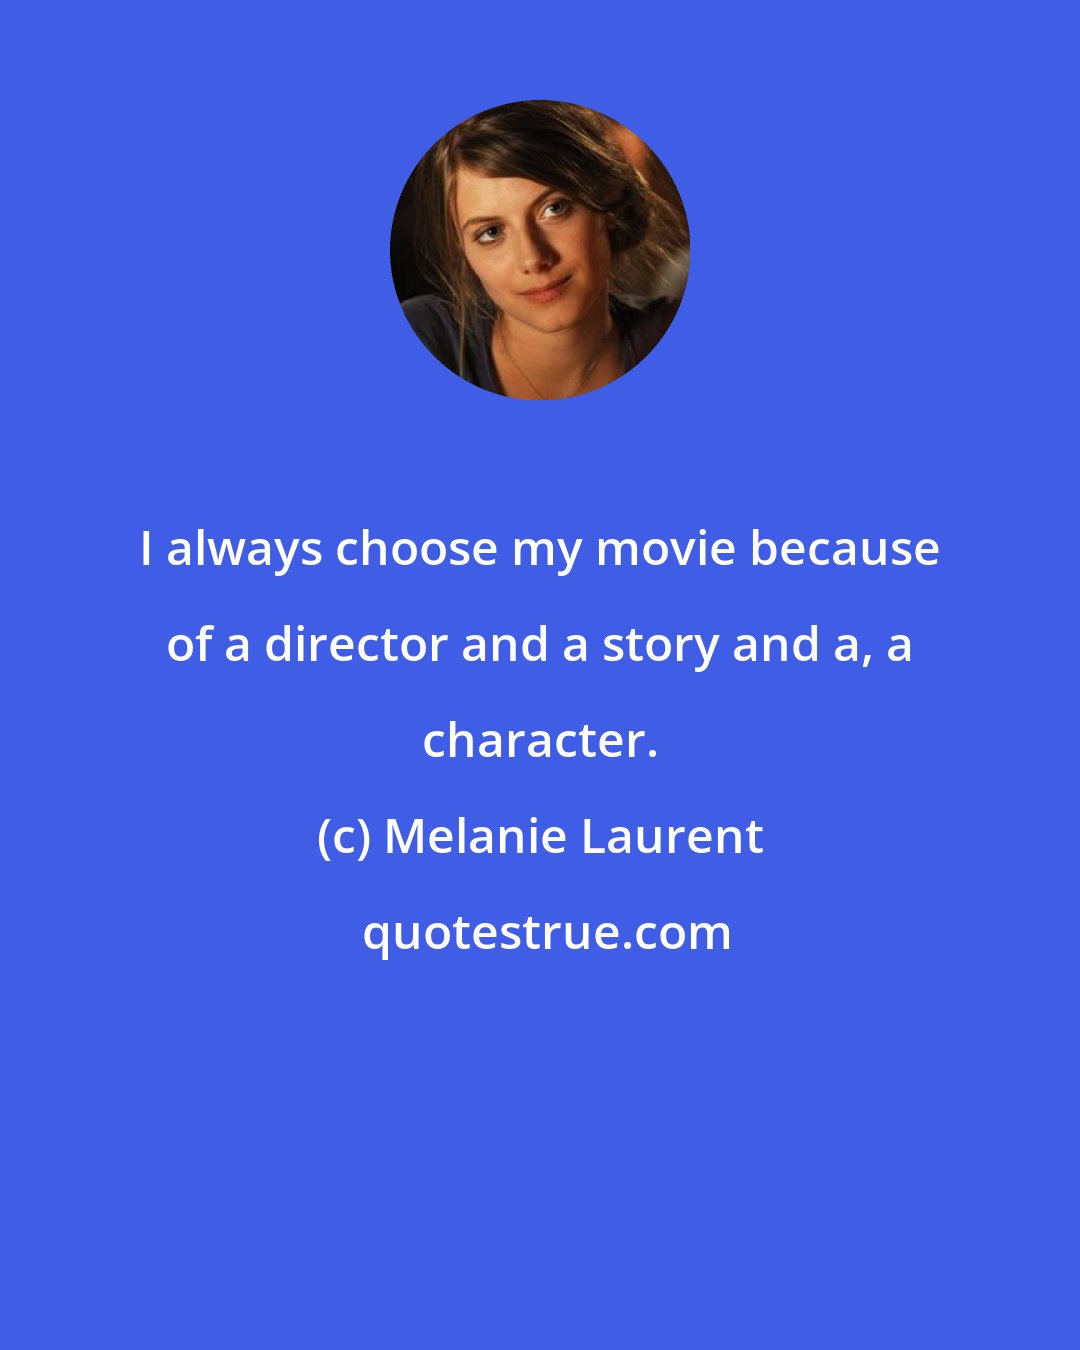 Melanie Laurent: I always choose my movie because of a director and a story and a, a character.